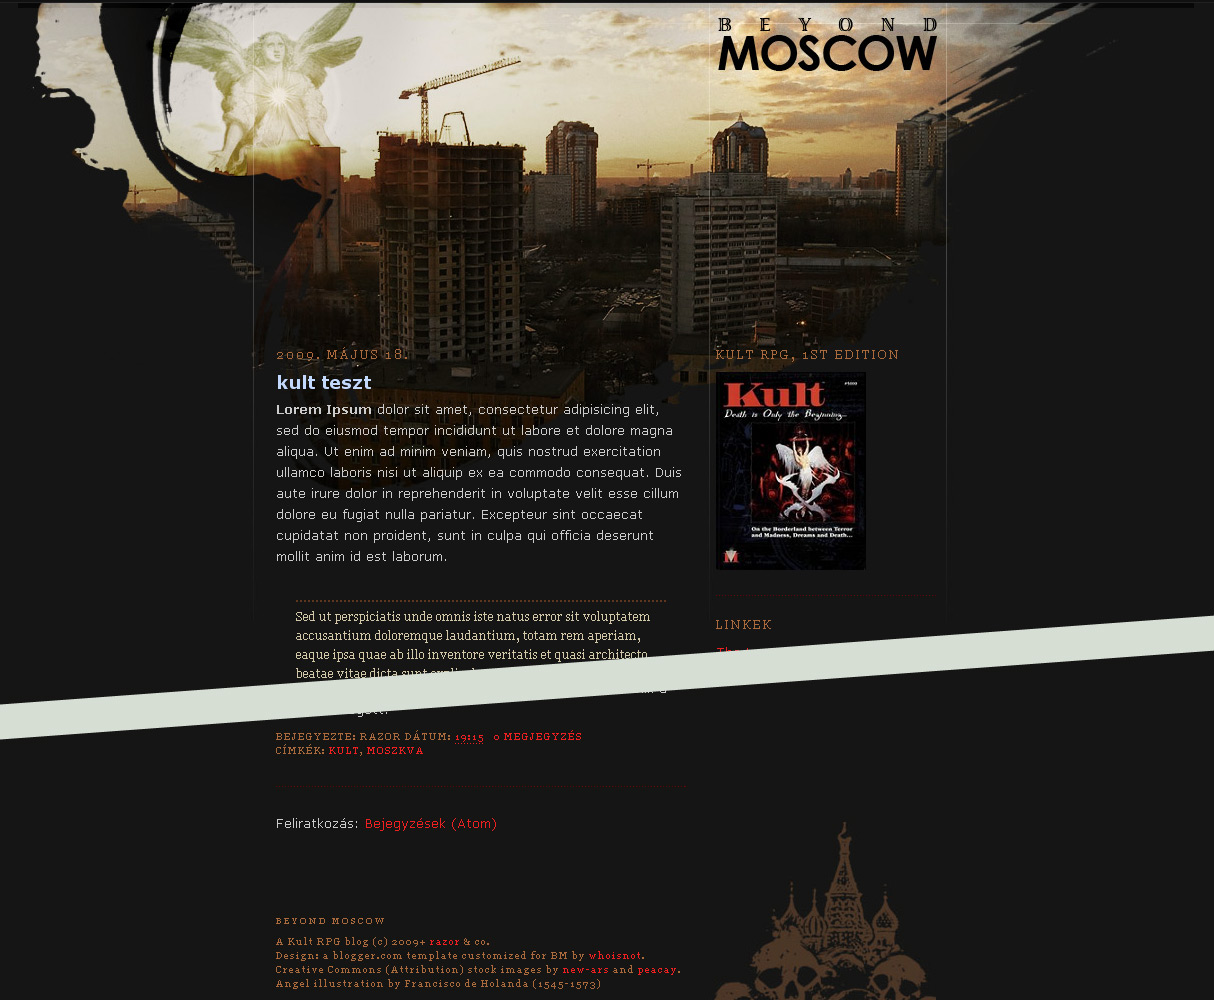 Beyond Moscow